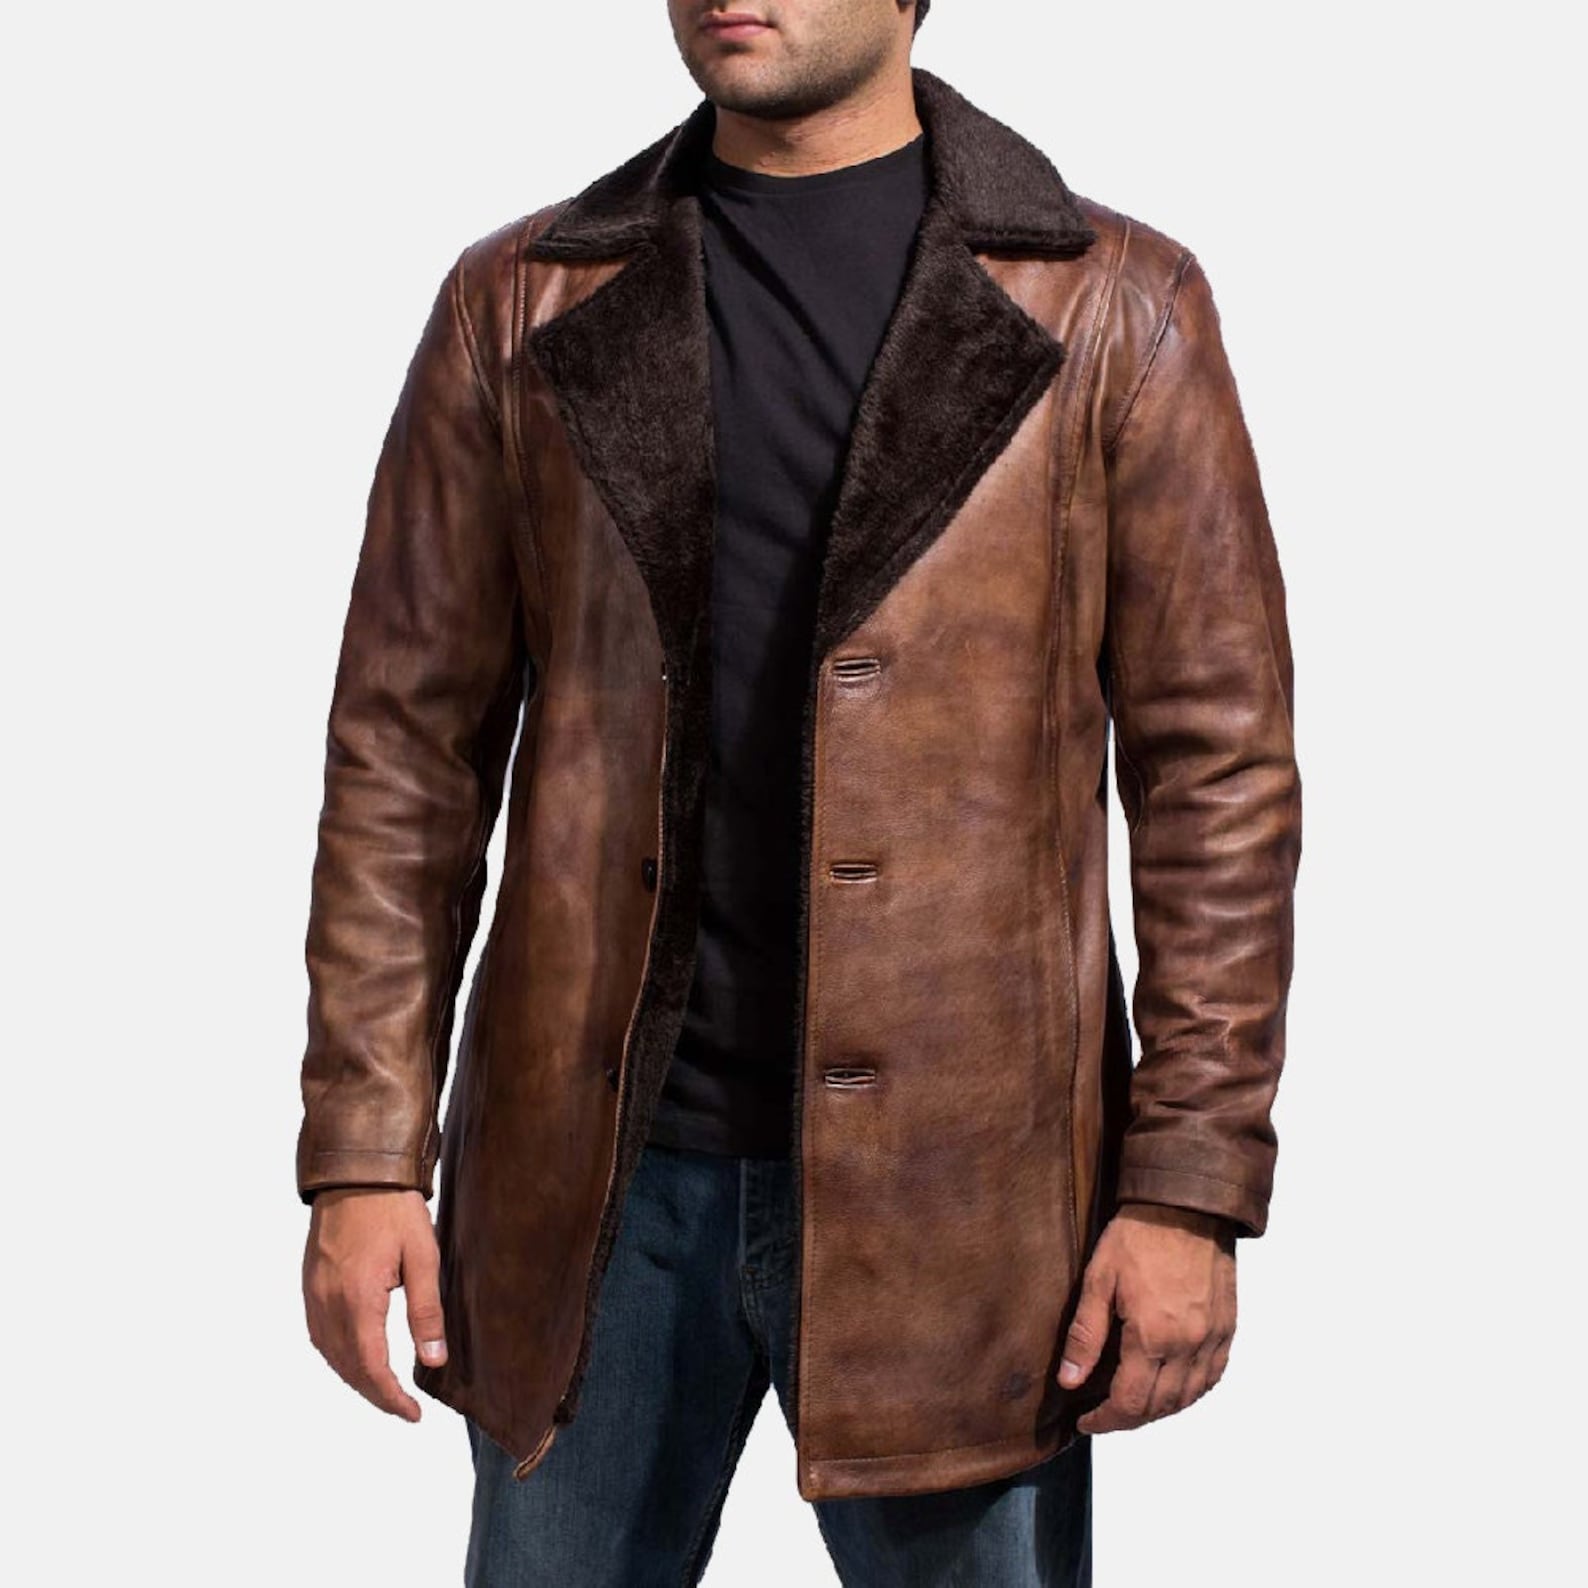 Men Distressed Brown Leather Coat Genuine Sheepskin Real Leather Winter ...